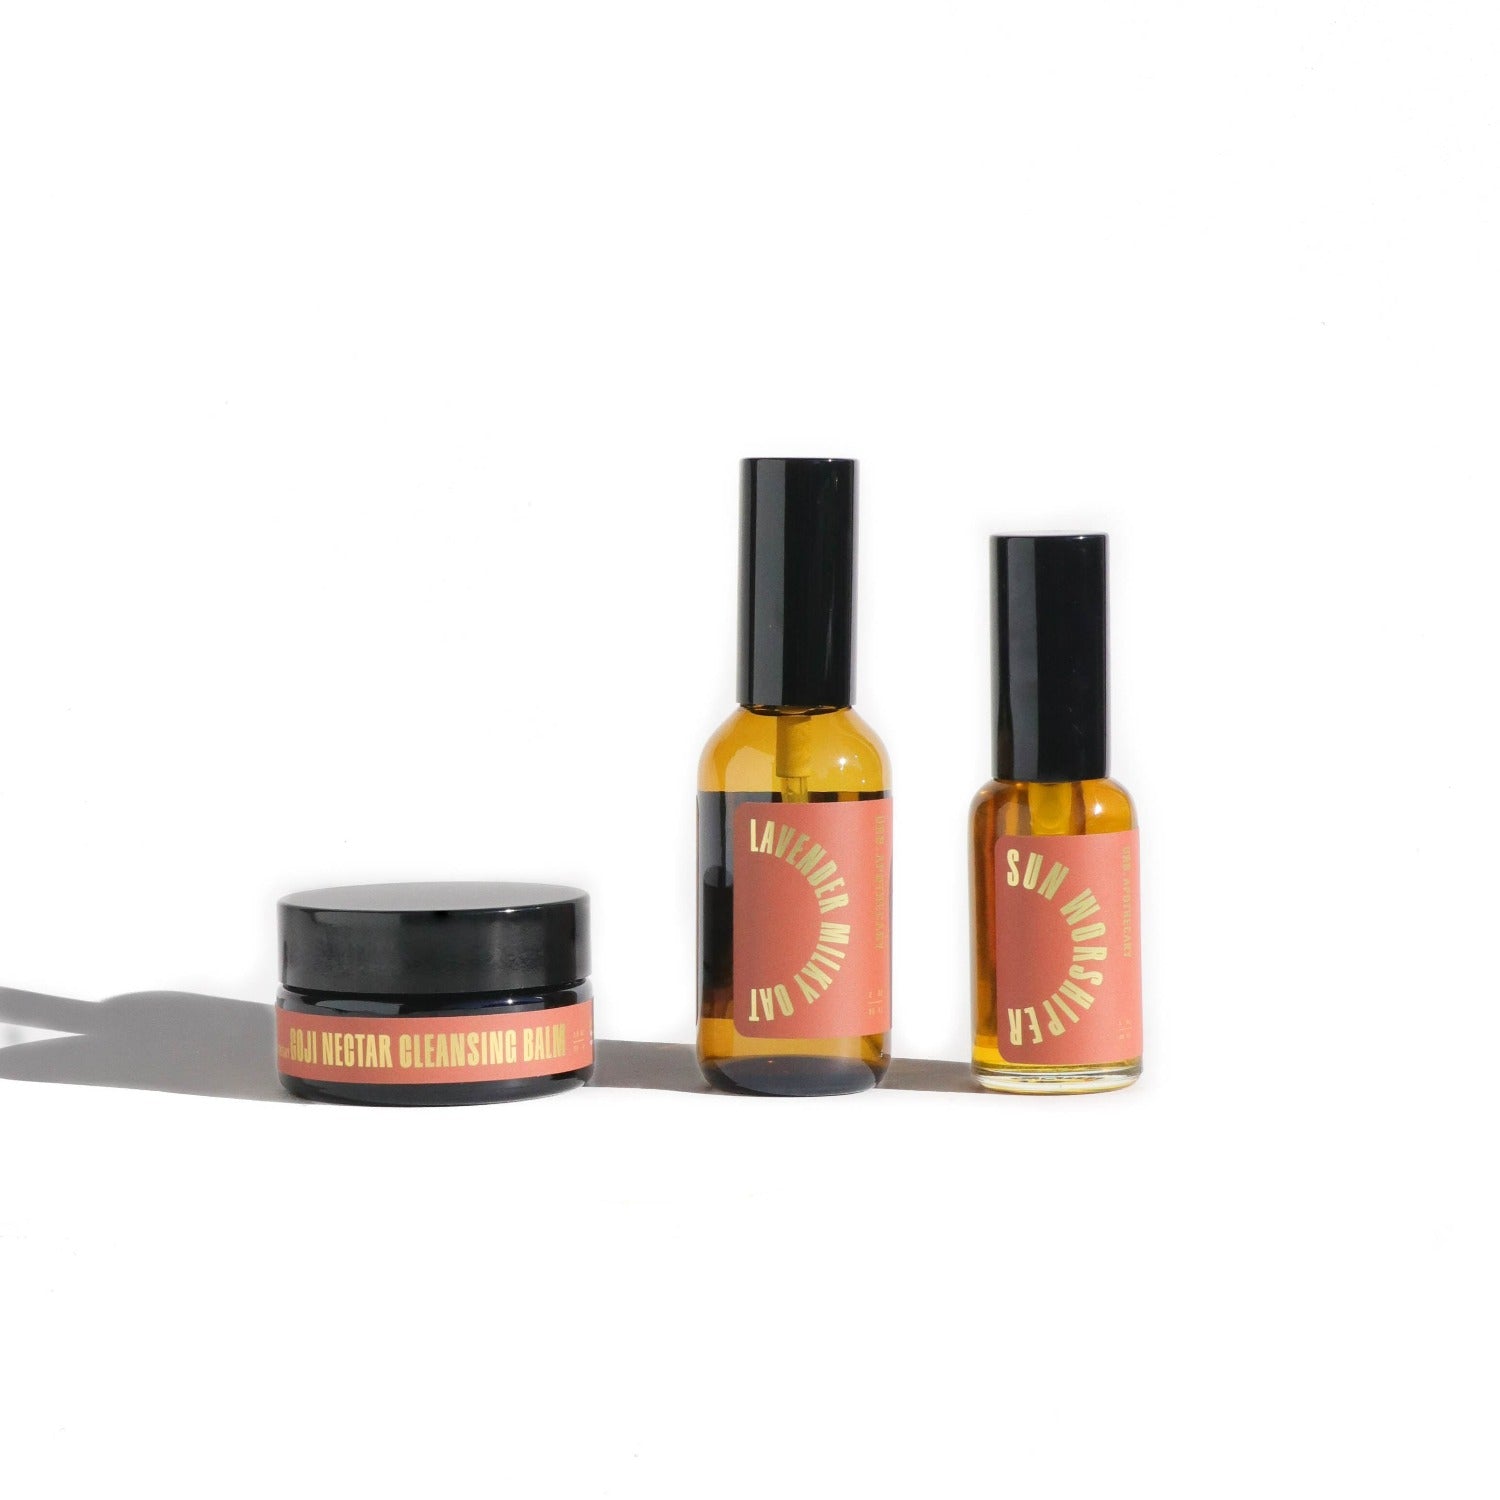 Daily Cleansing Bundle with Goji Nectar Cleansing Balm